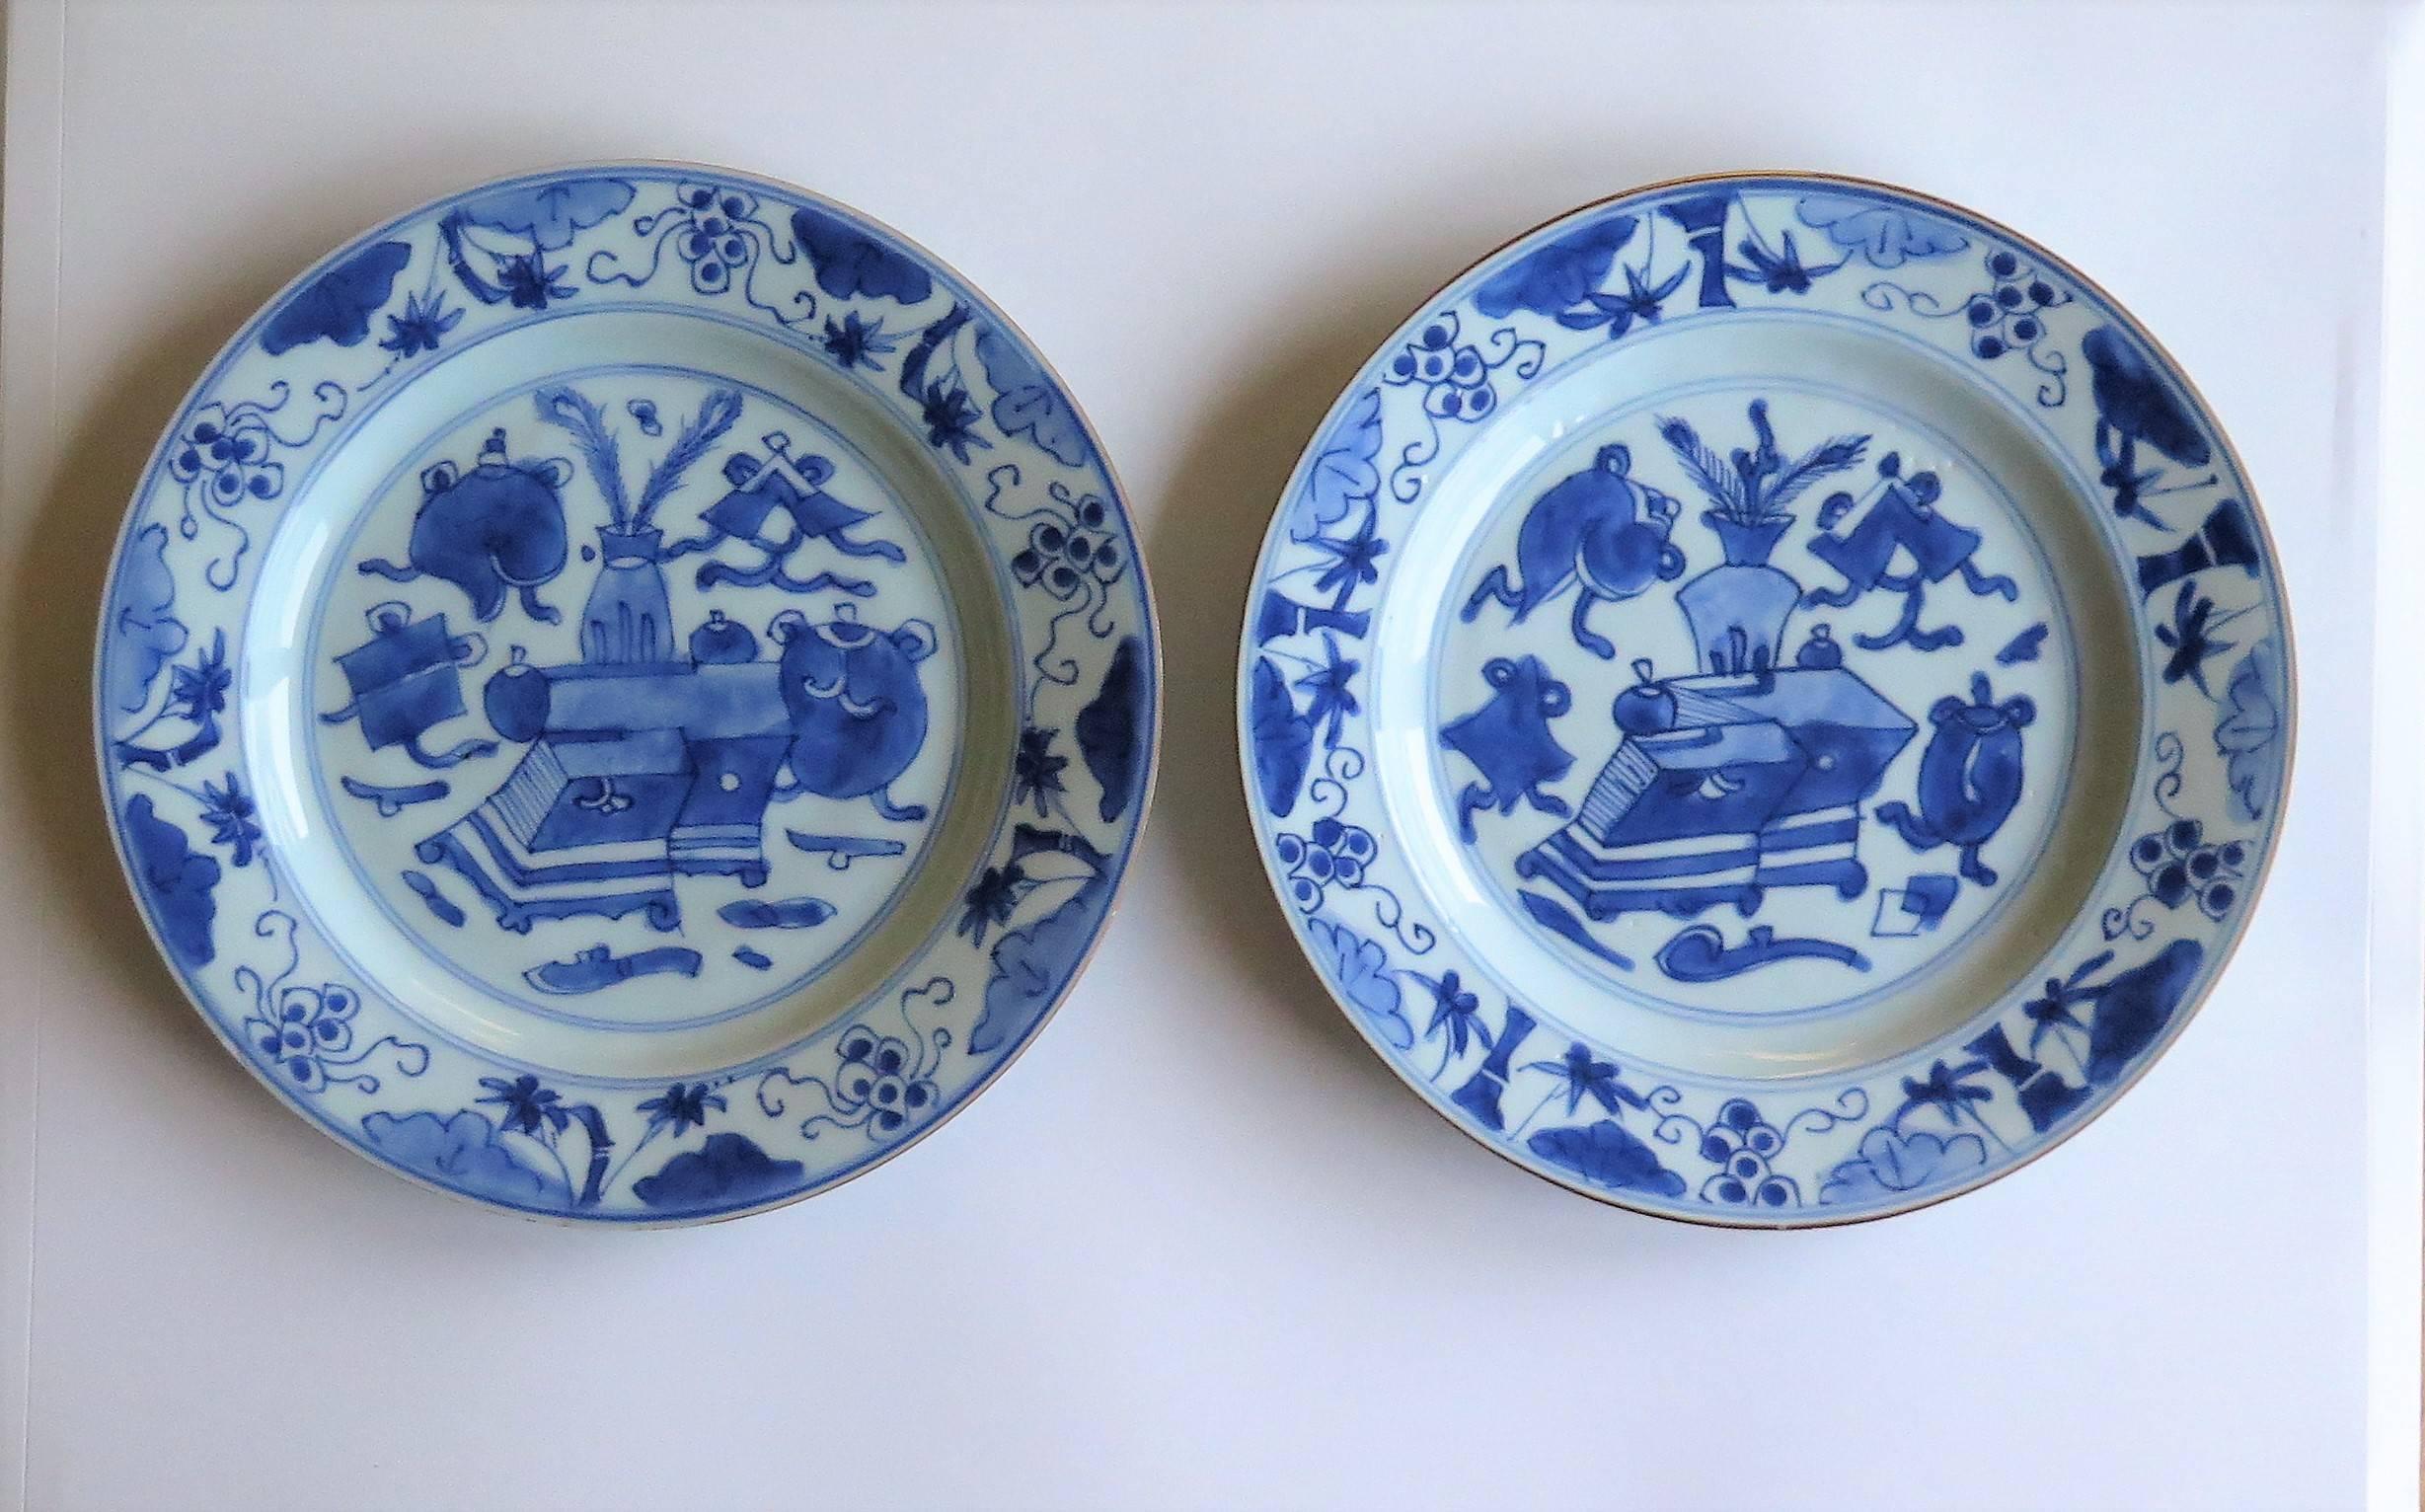 These are a beautiful hand-painted pair of Chinese porcelain plates, dating to the early / mid-18th century, circa 1720-1750, Qing dynasty.

The plates are well potted, and have been hand decorated in varying shades of cobalt blue. The glaze is thin